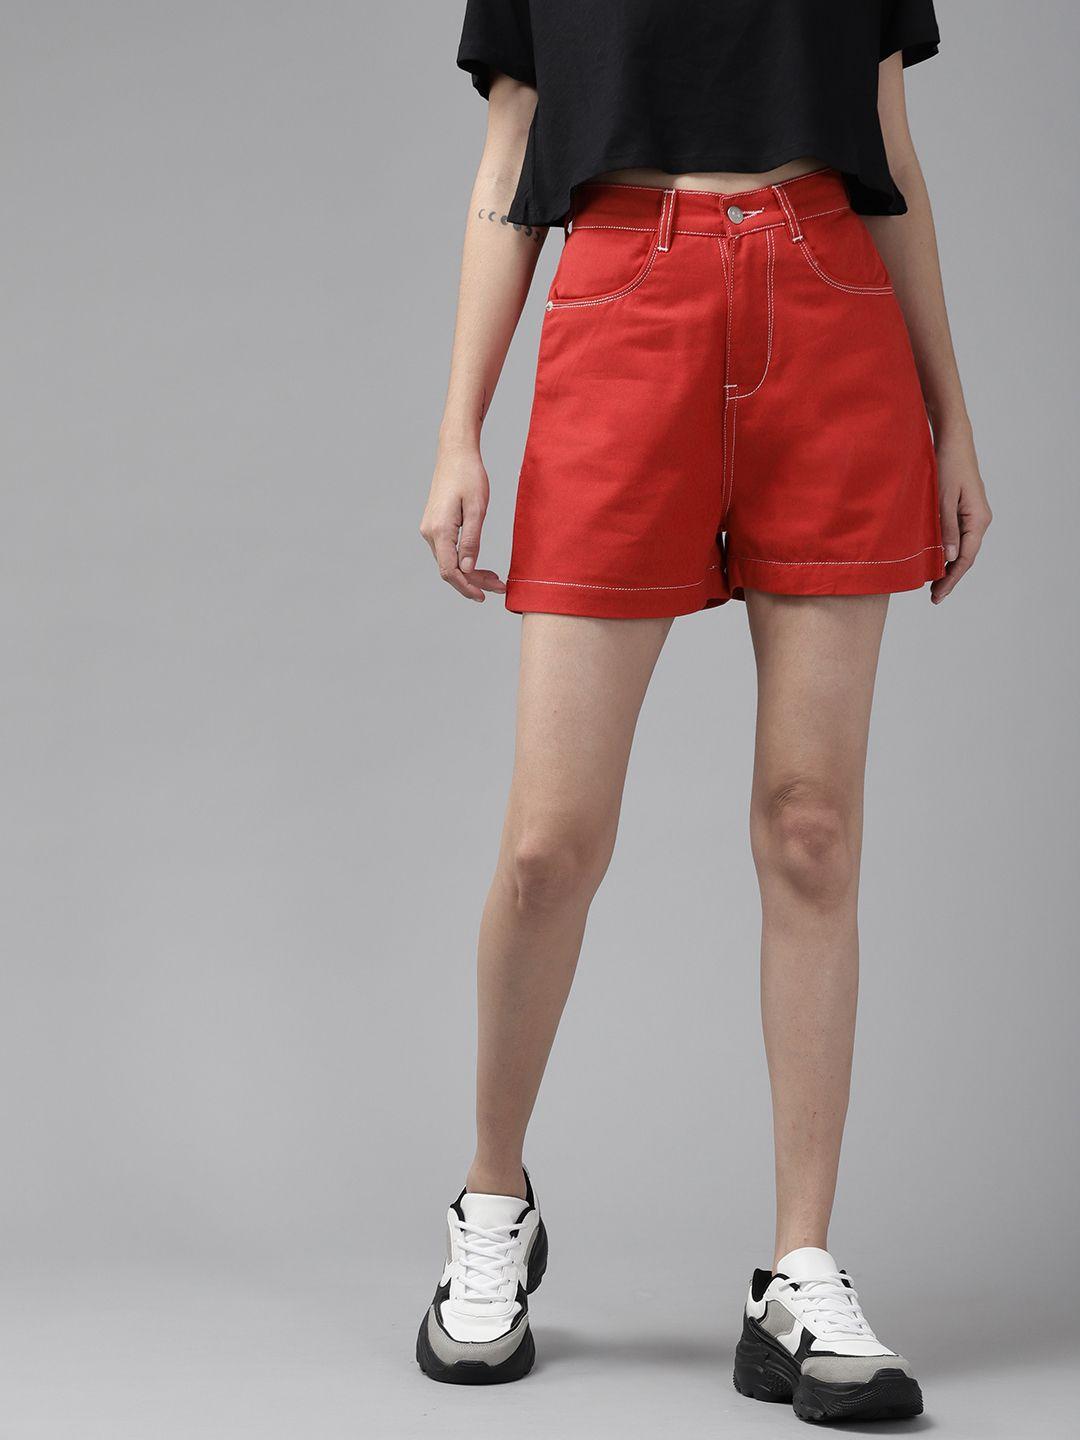 kassually women red high-rise shorts